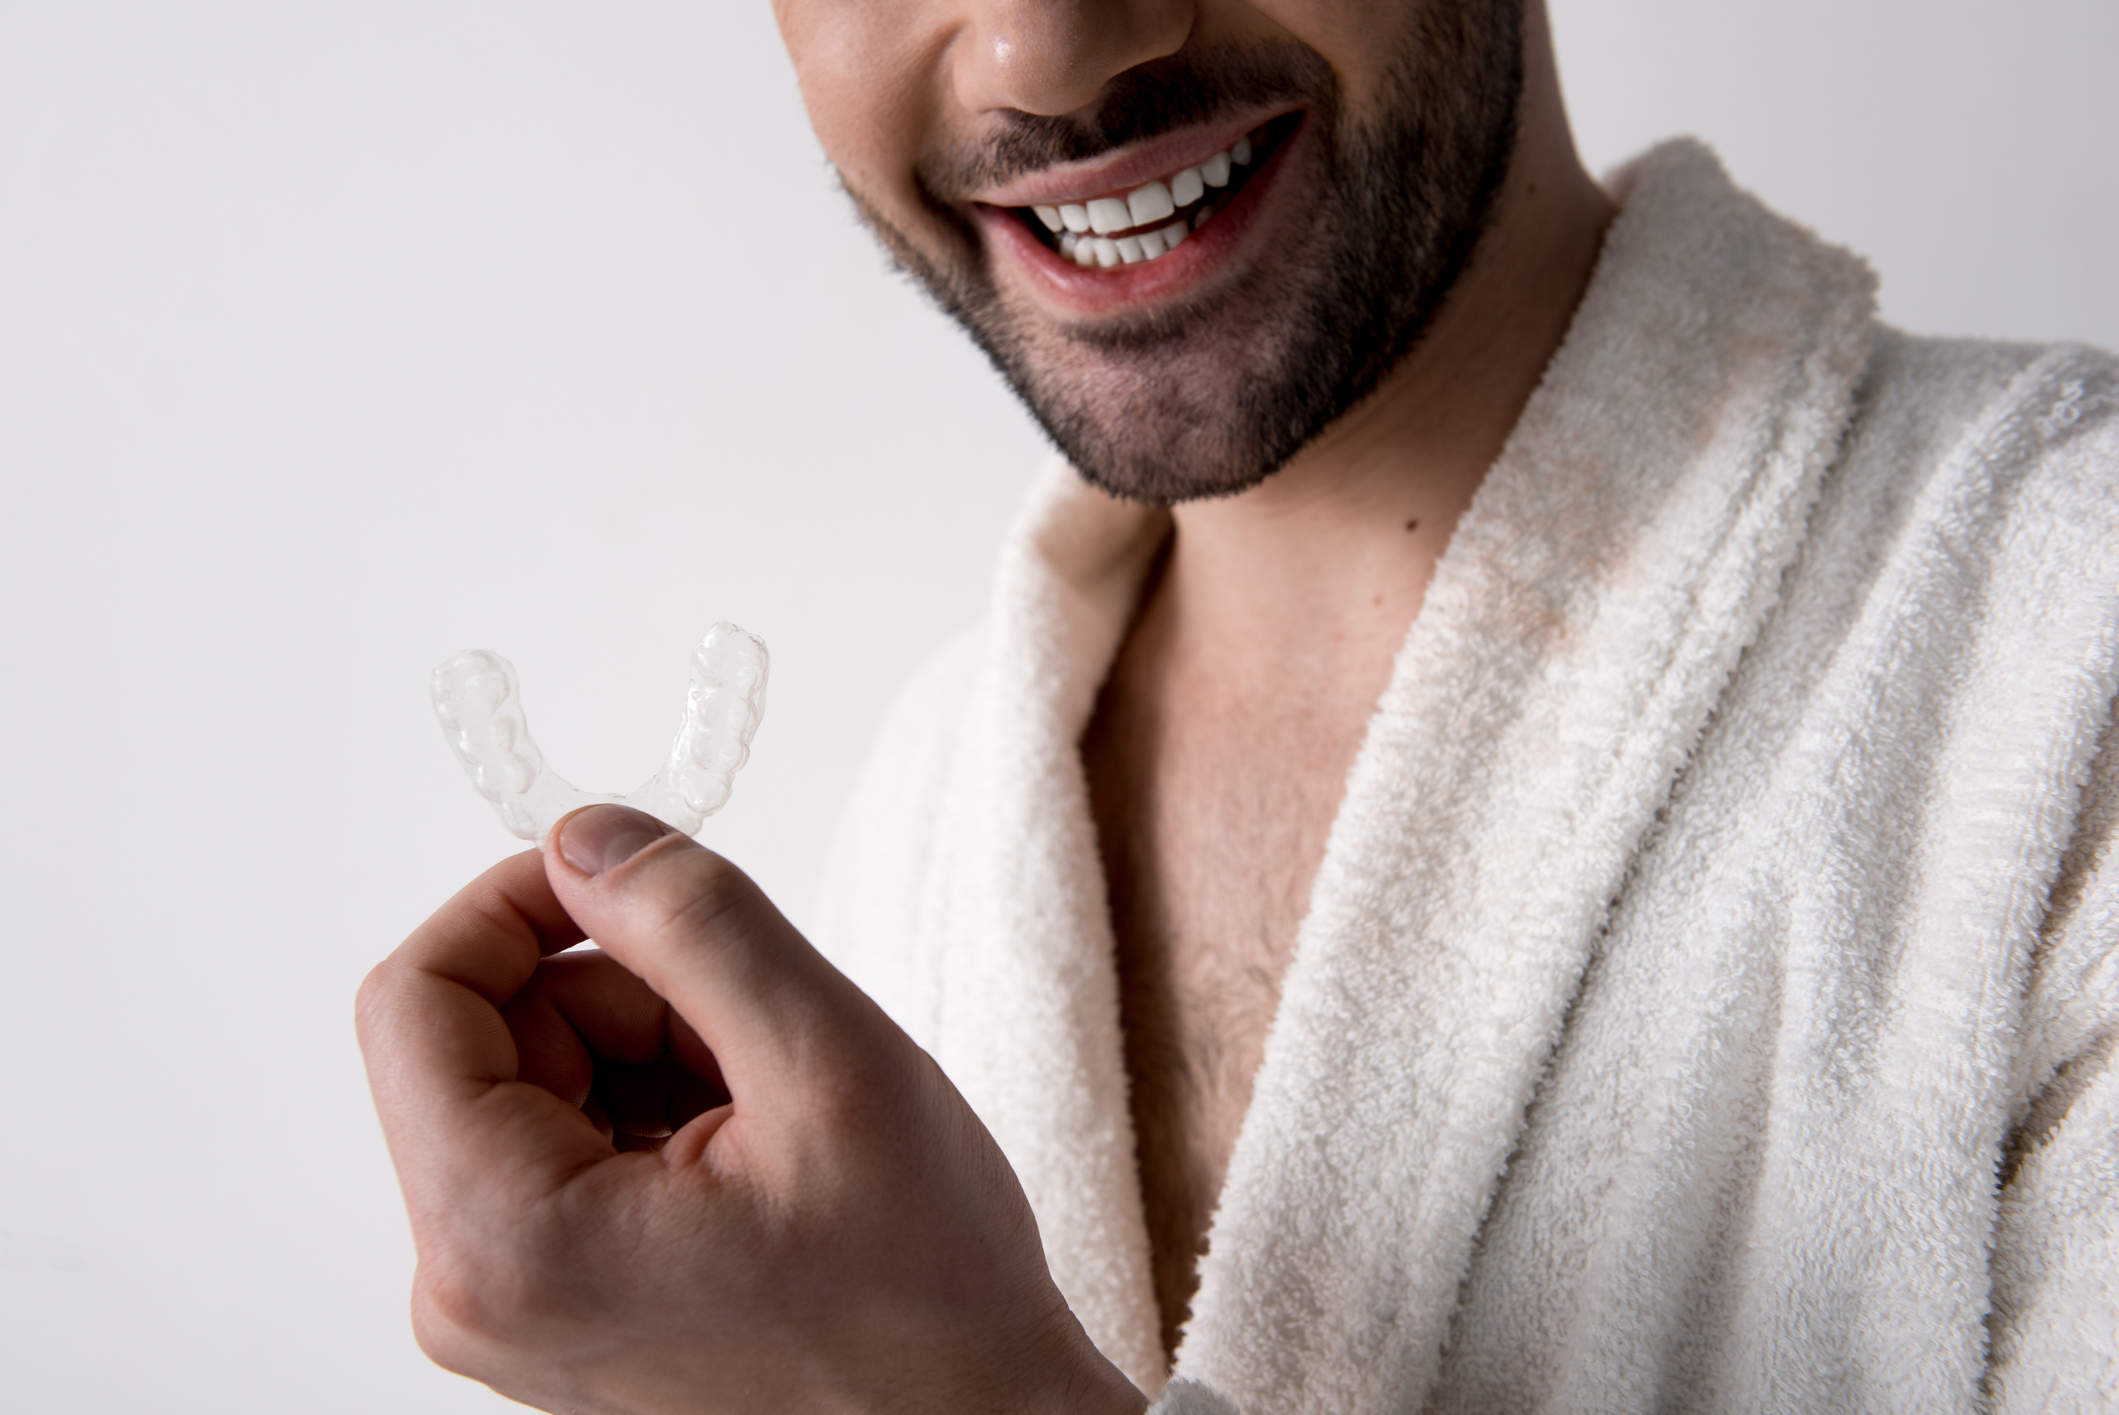 A smiling man in a bathrobe shows off the Invisalign aligner he likes better than braces.